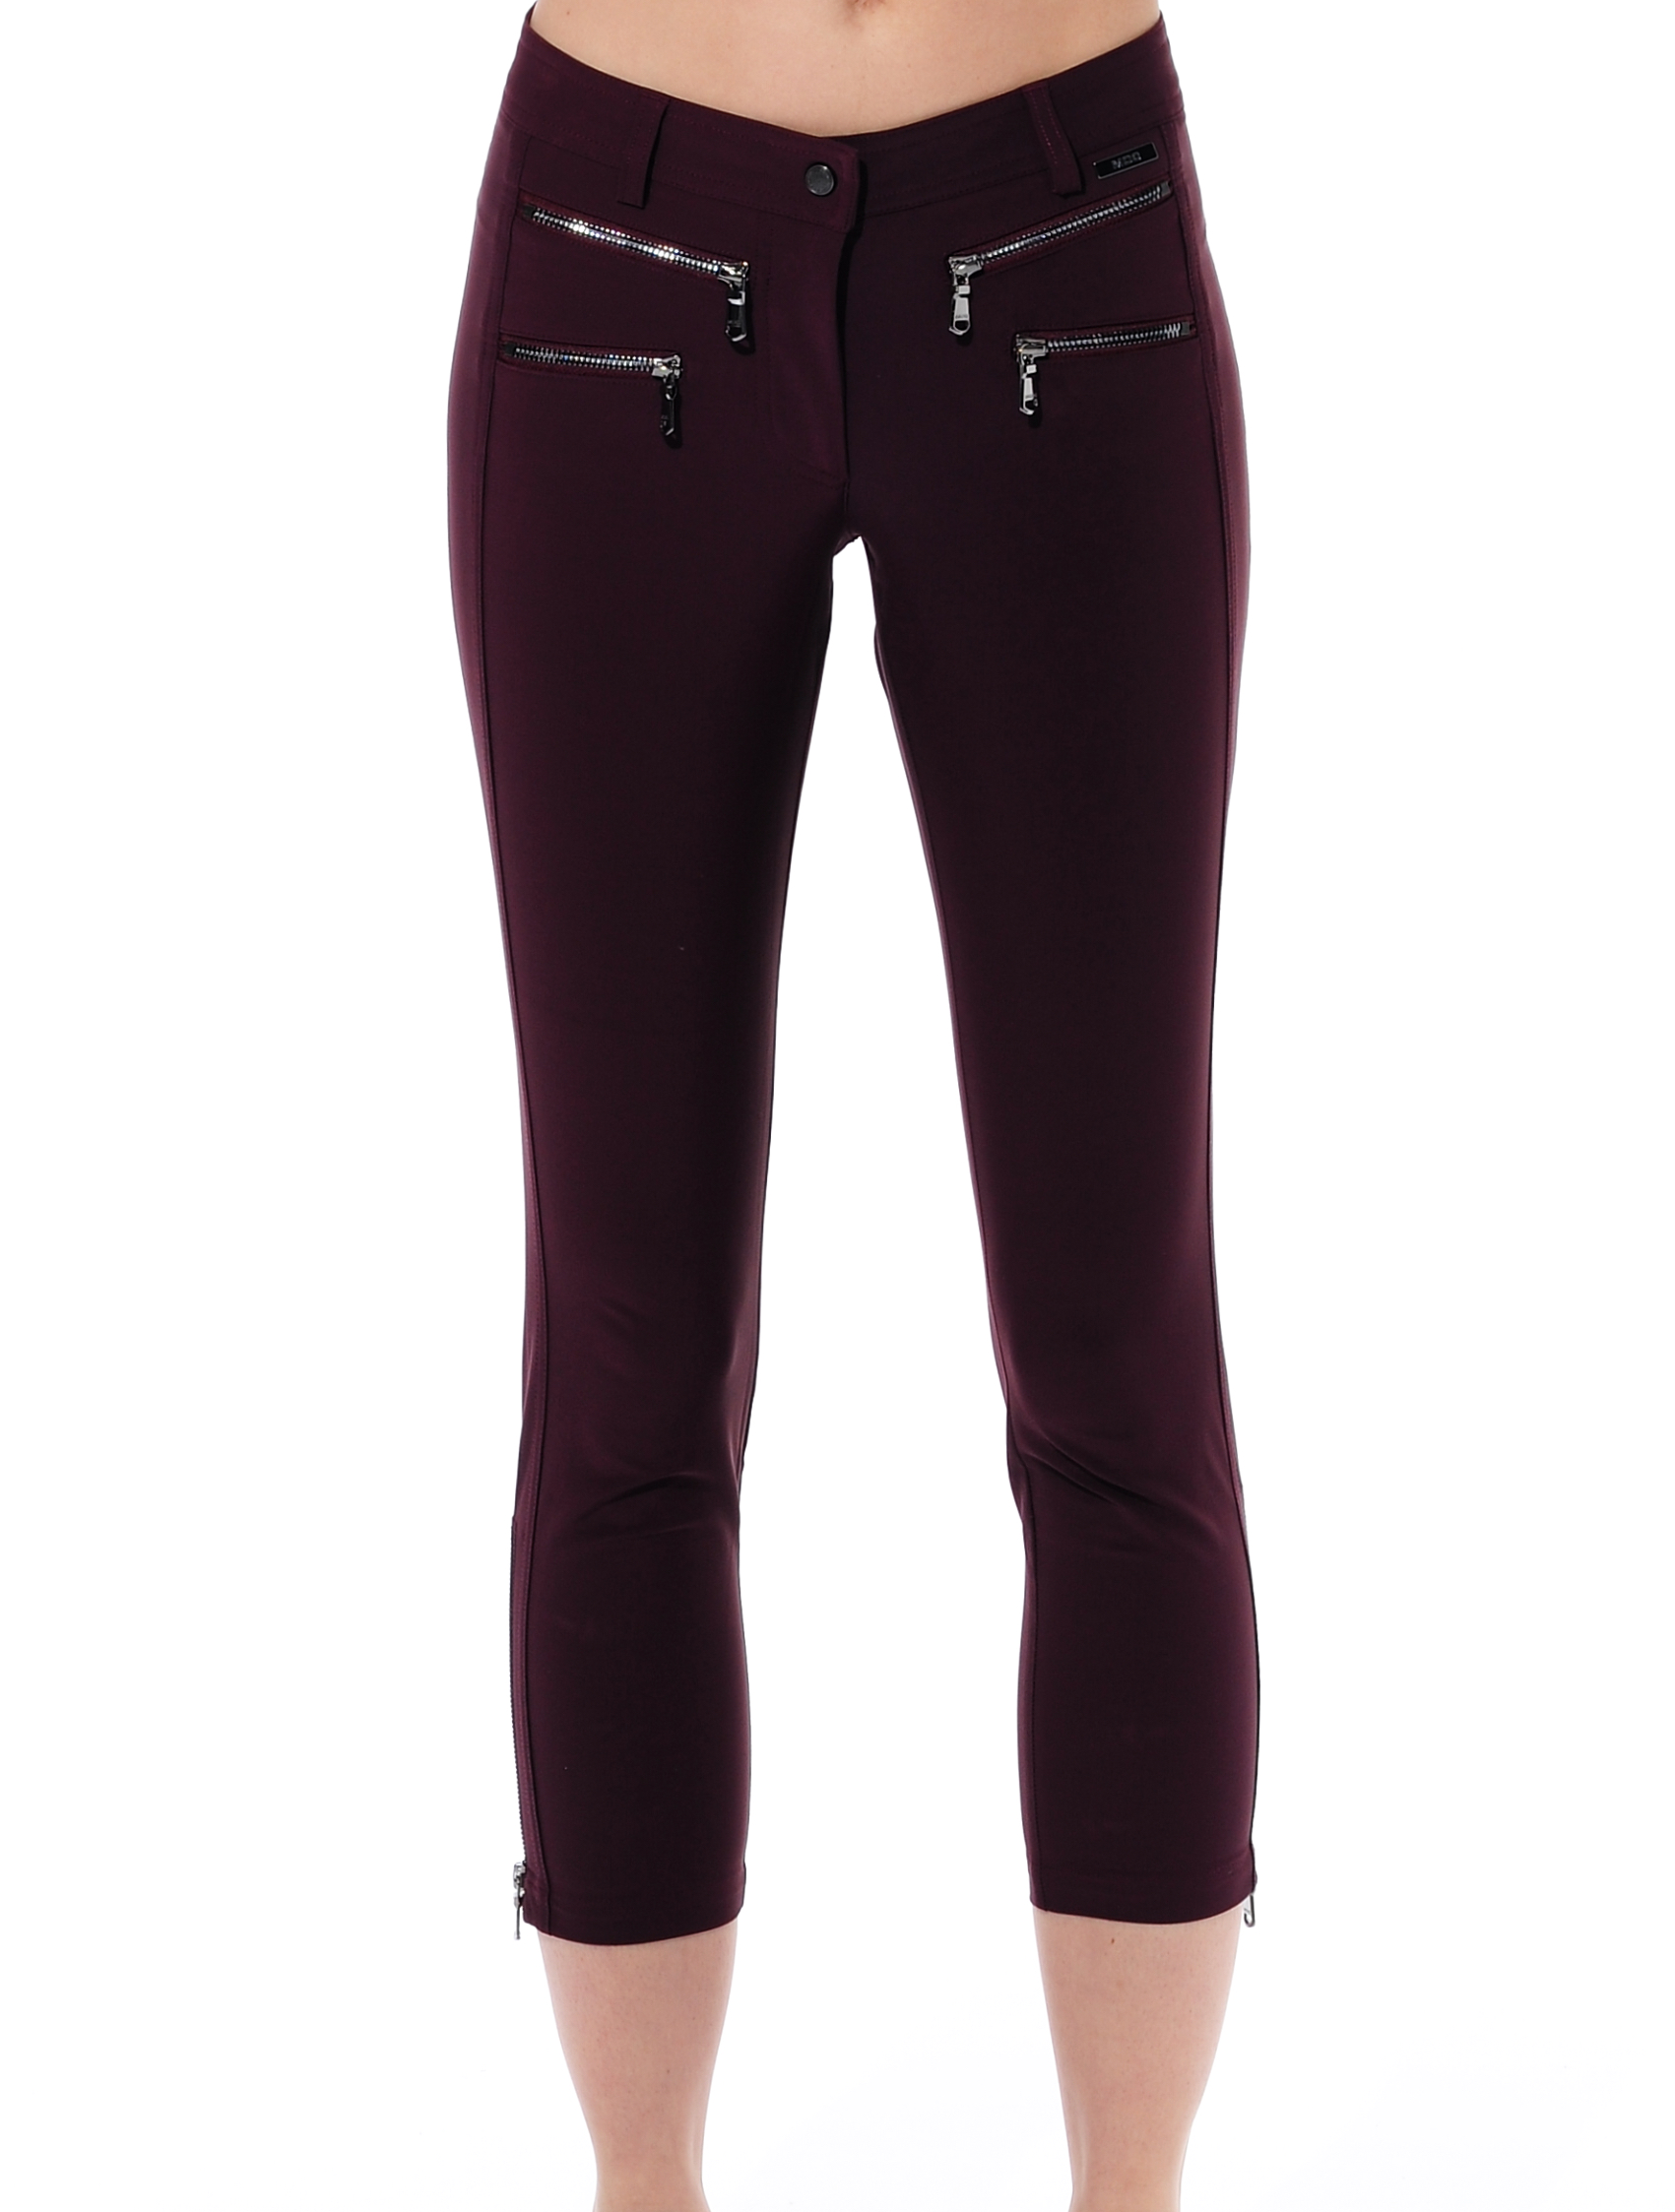 4way stretch double zip cropped pants bloodstone 